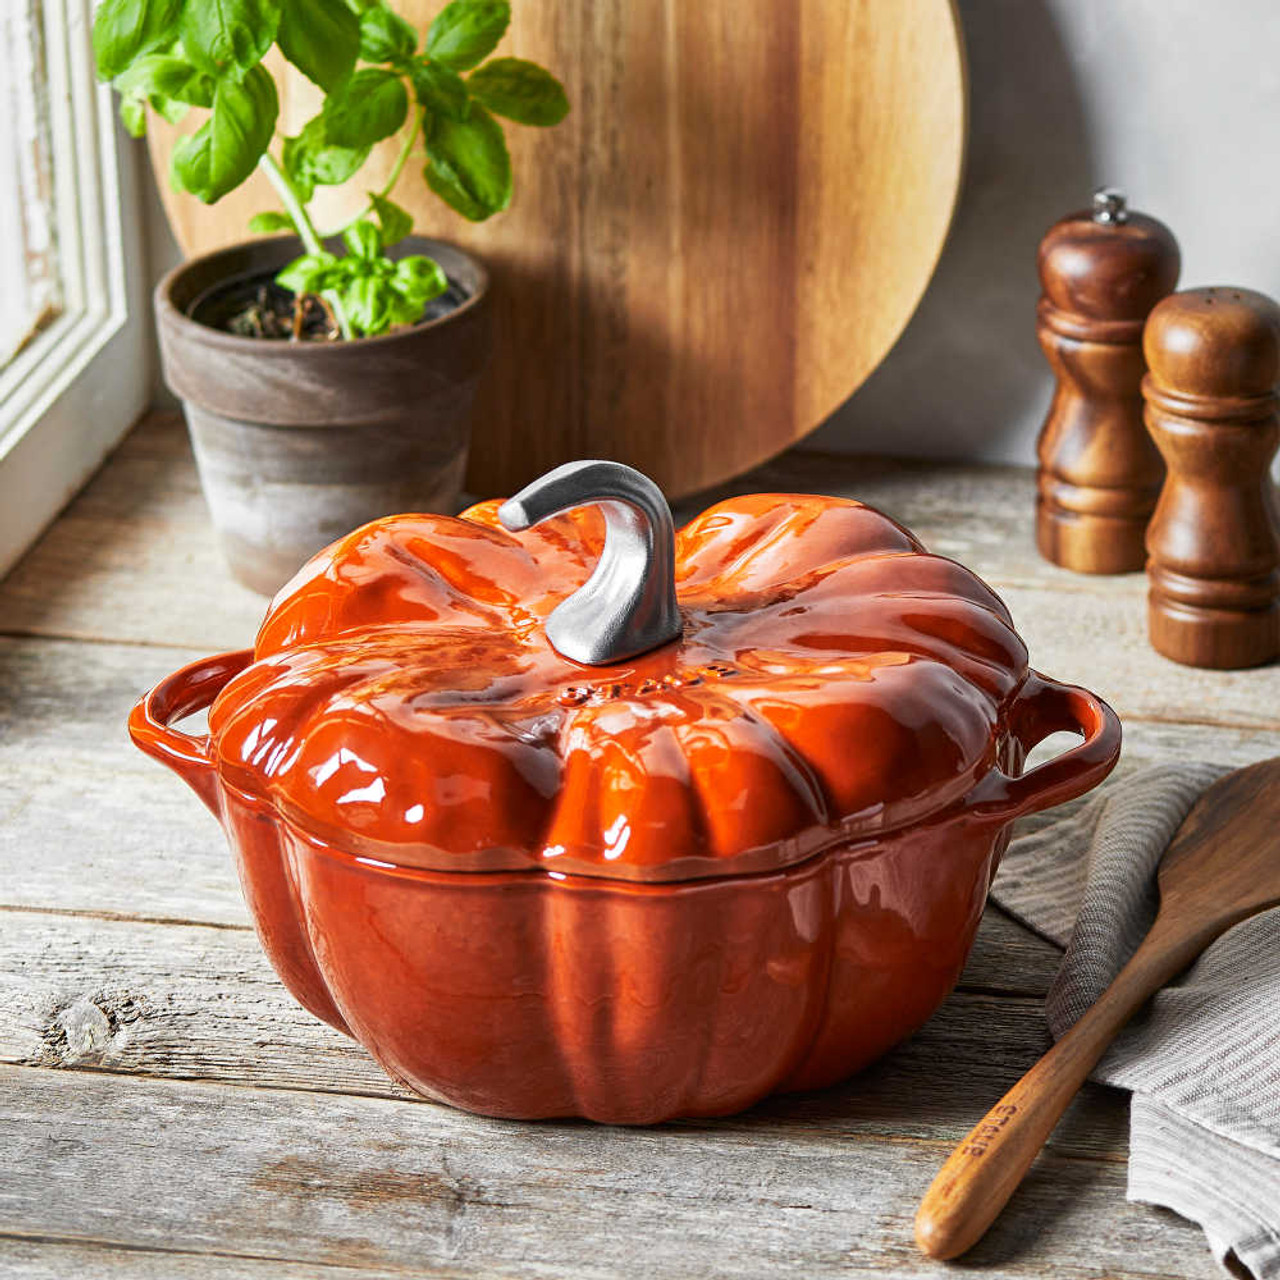 https://cdn11.bigcommerce.com/s-hccytny0od/images/stencil/1280x1280/products/5766/26626/Staub_Cast_Iron_Pumpkin_Cocotte_in_Burnt_Orange__59051.1702578995.jpg?c=2?imbypass=on